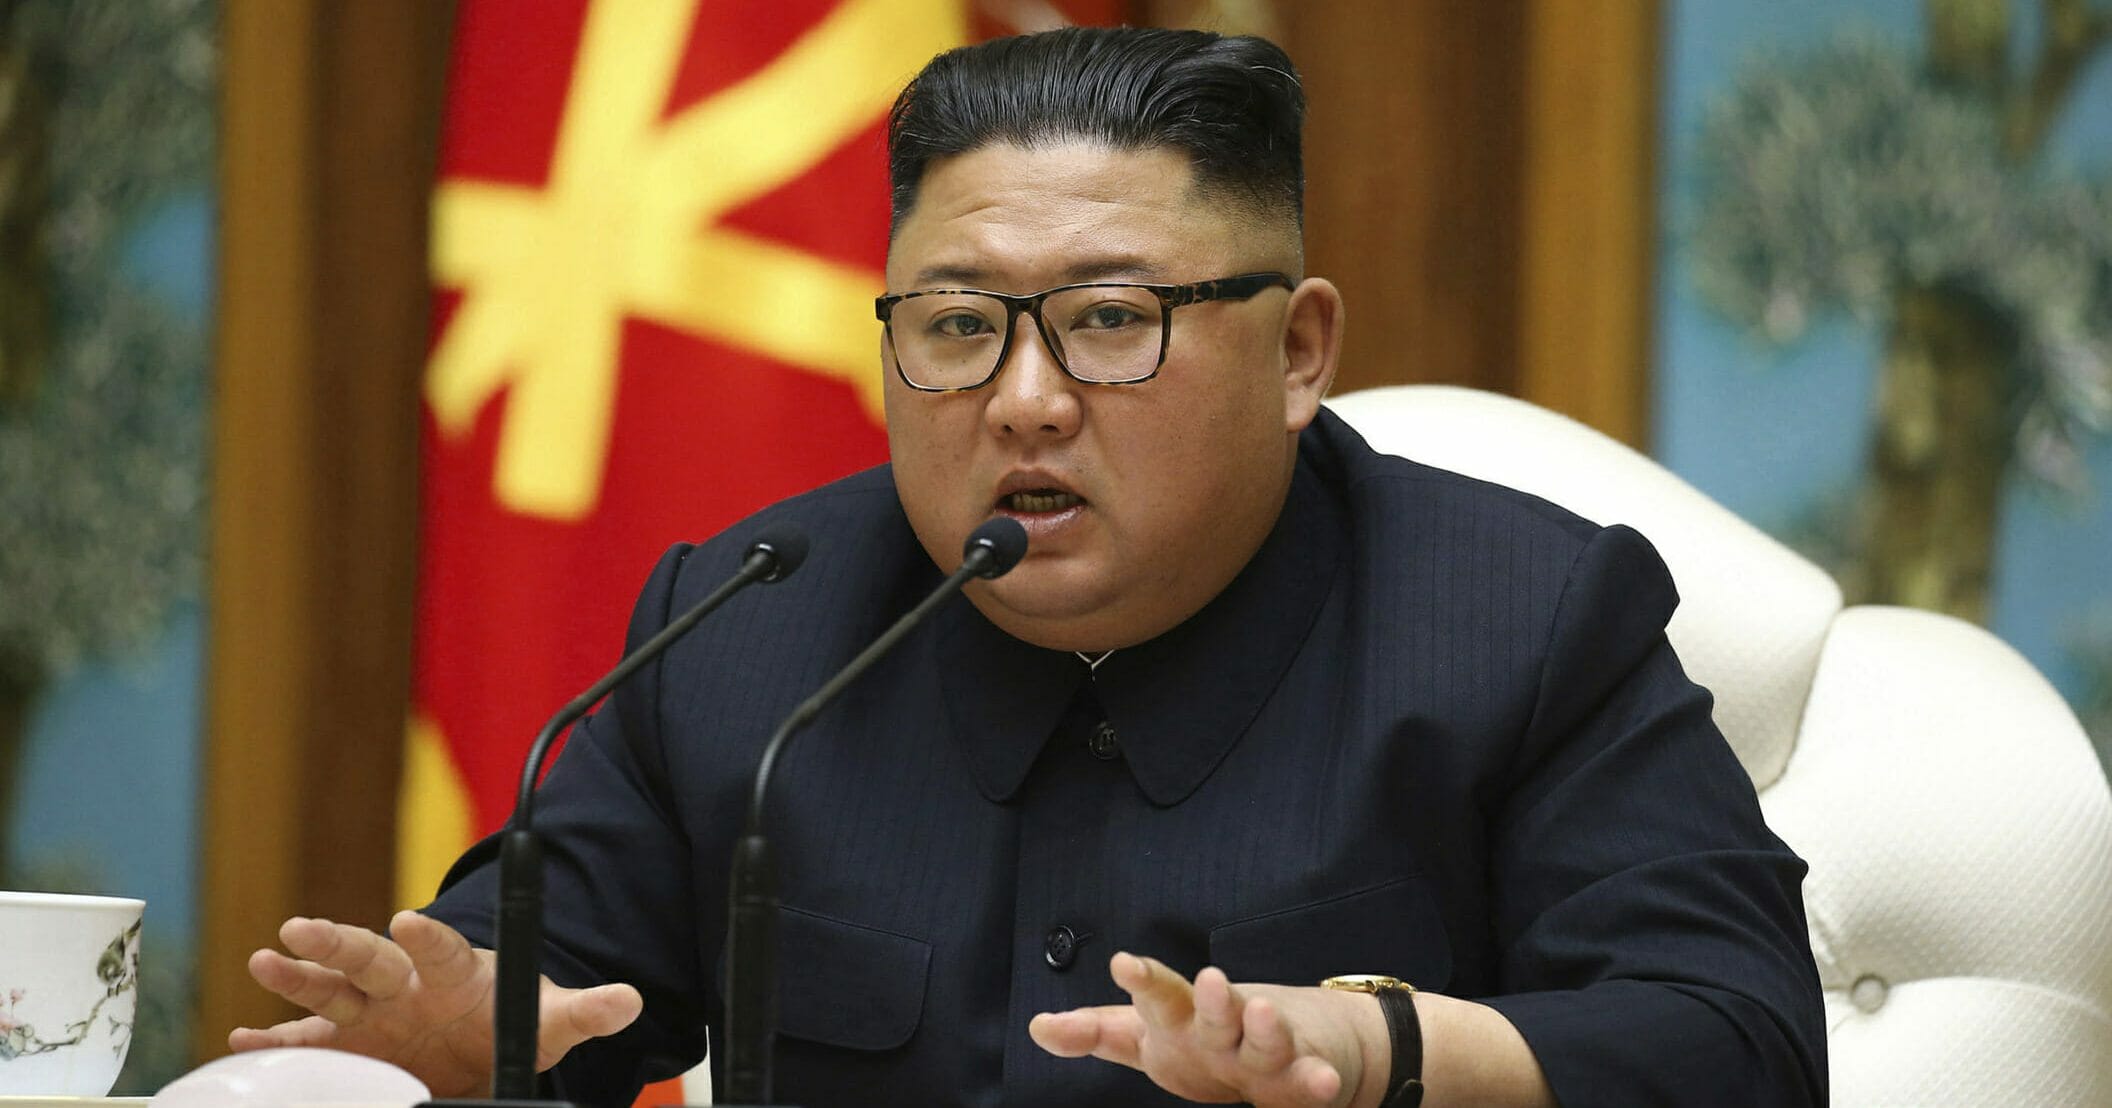 North Korean leader Kim Jong Un attends a politburo meeting of the ruling Workers' Party of Korea in Pyongyang on April 11, 2020.